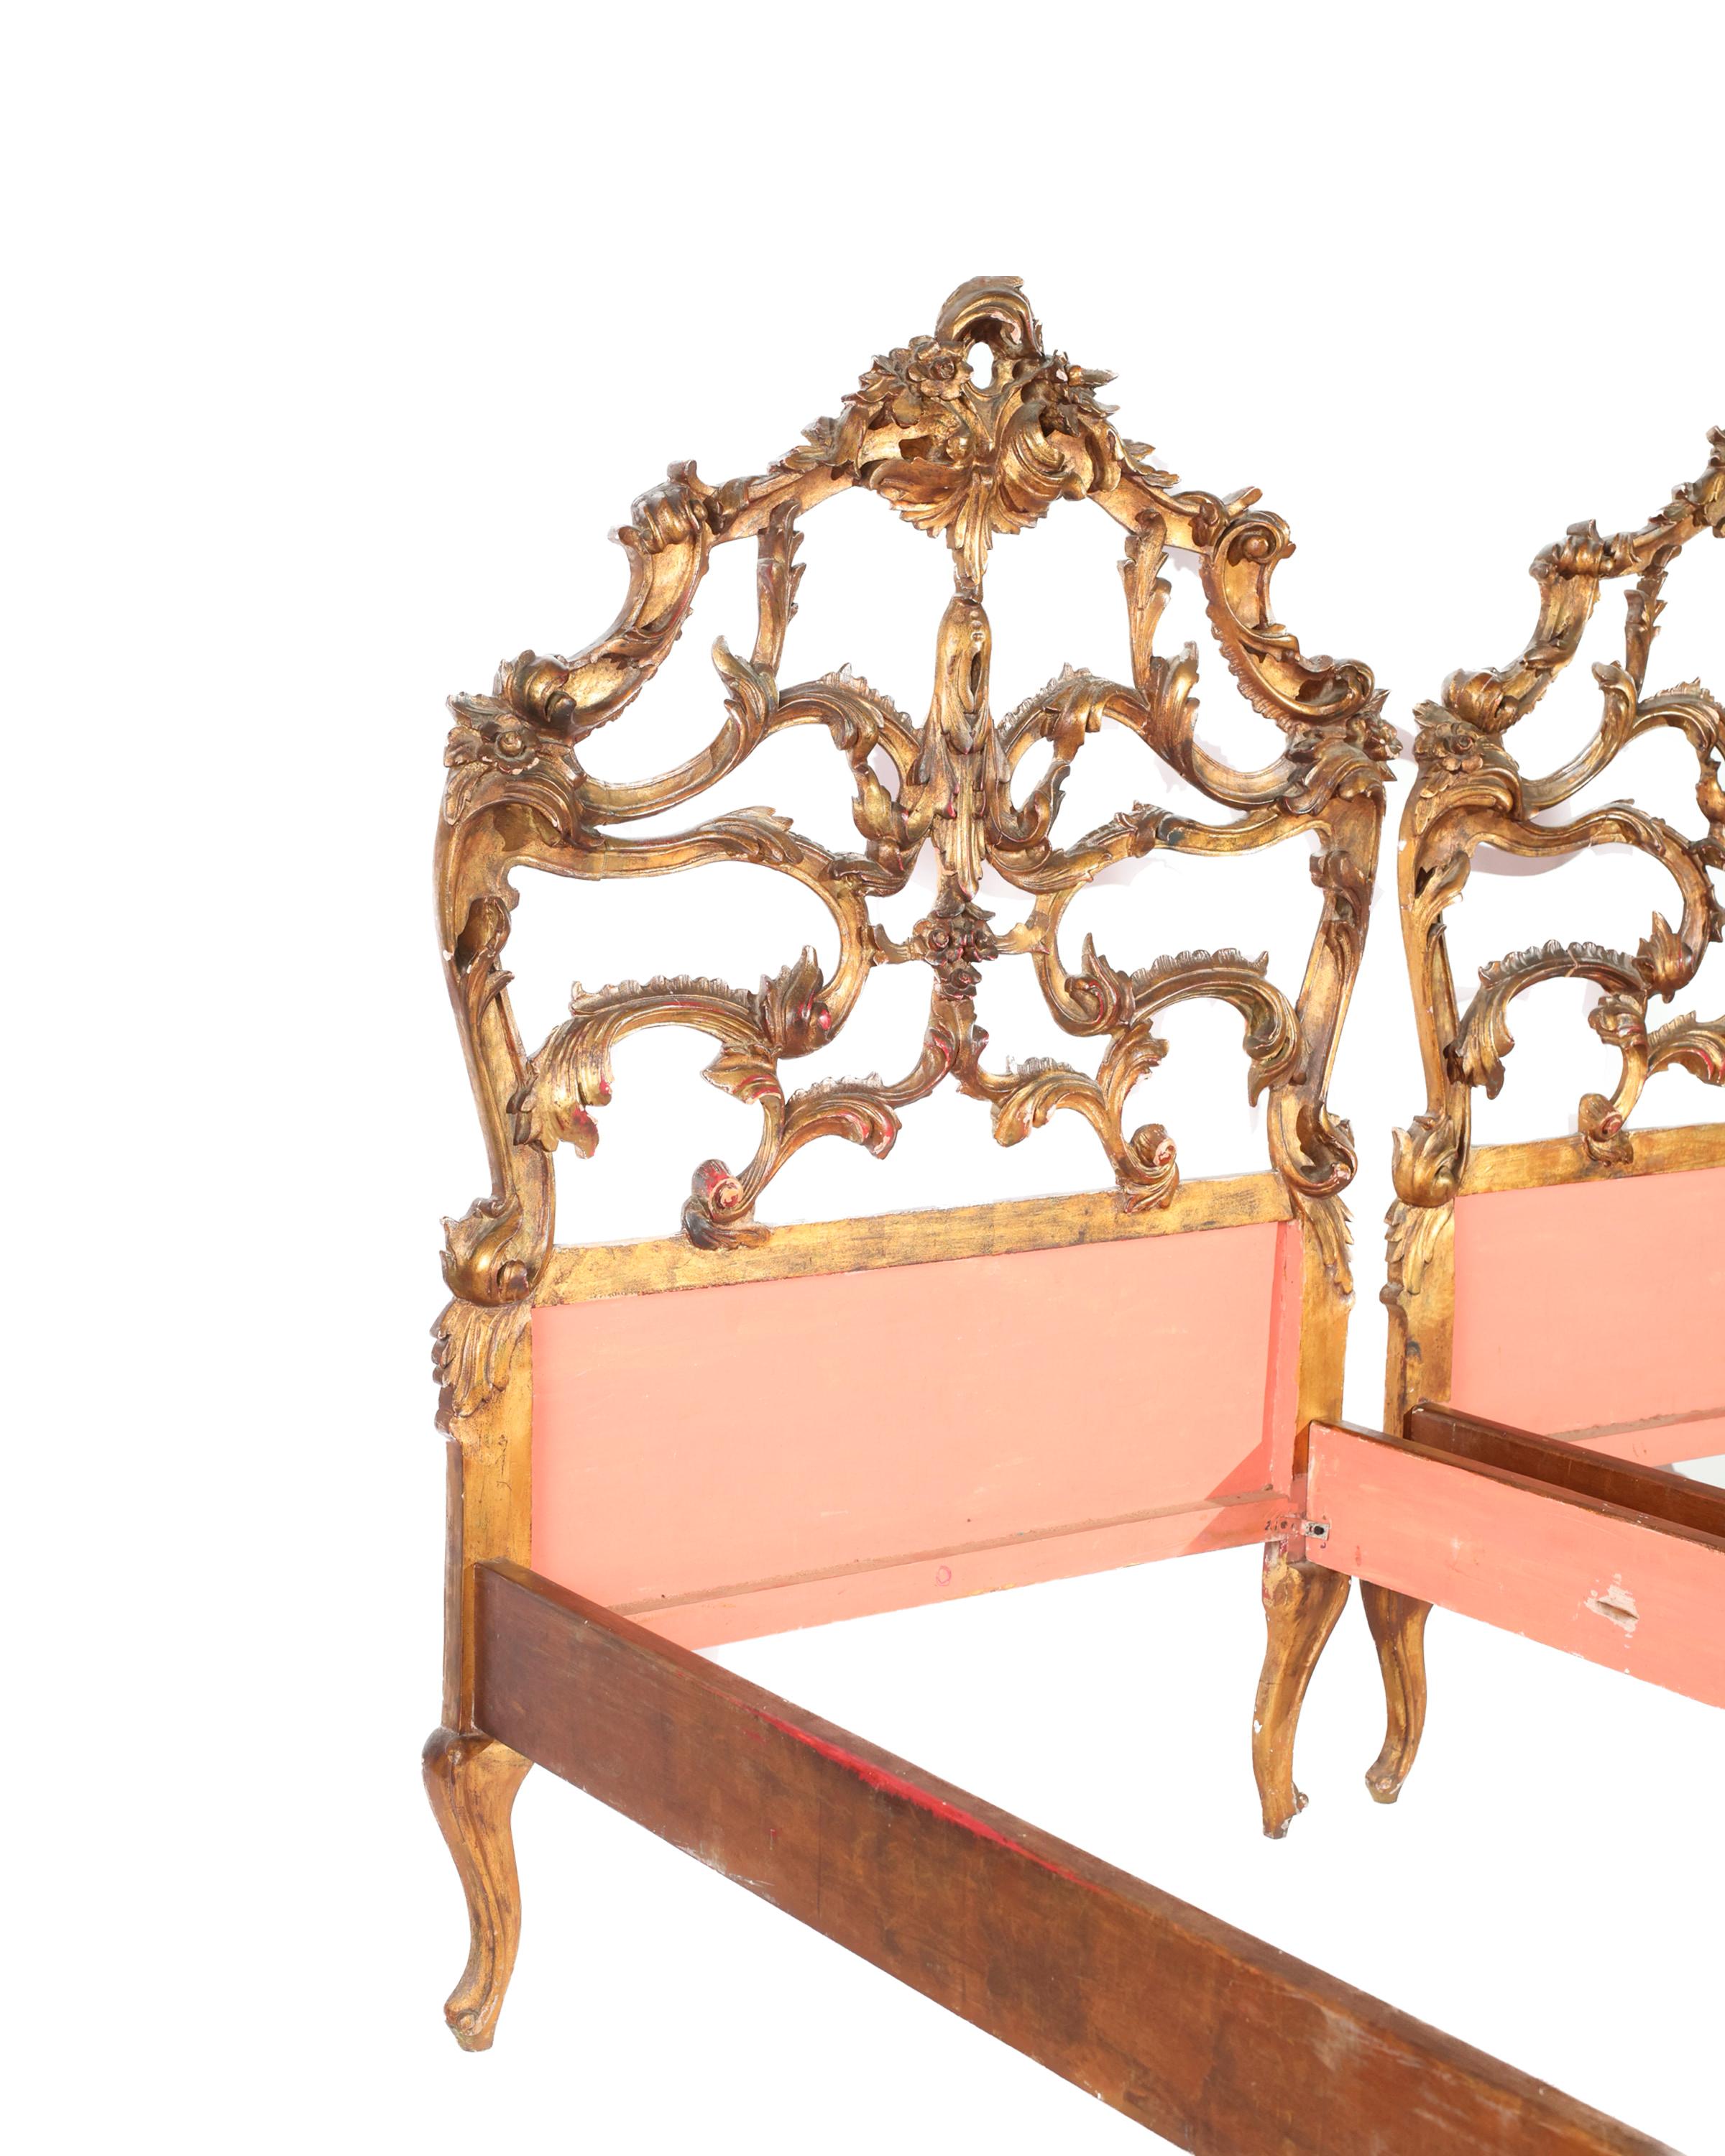 An extraordinary pair of ornately carved Italian giltwood beds purchased in Beziers, France. The pair would be stunning used traditionally as a pair, or together as a King sized bed. The impressive height of the gilt headboards have stunning impact